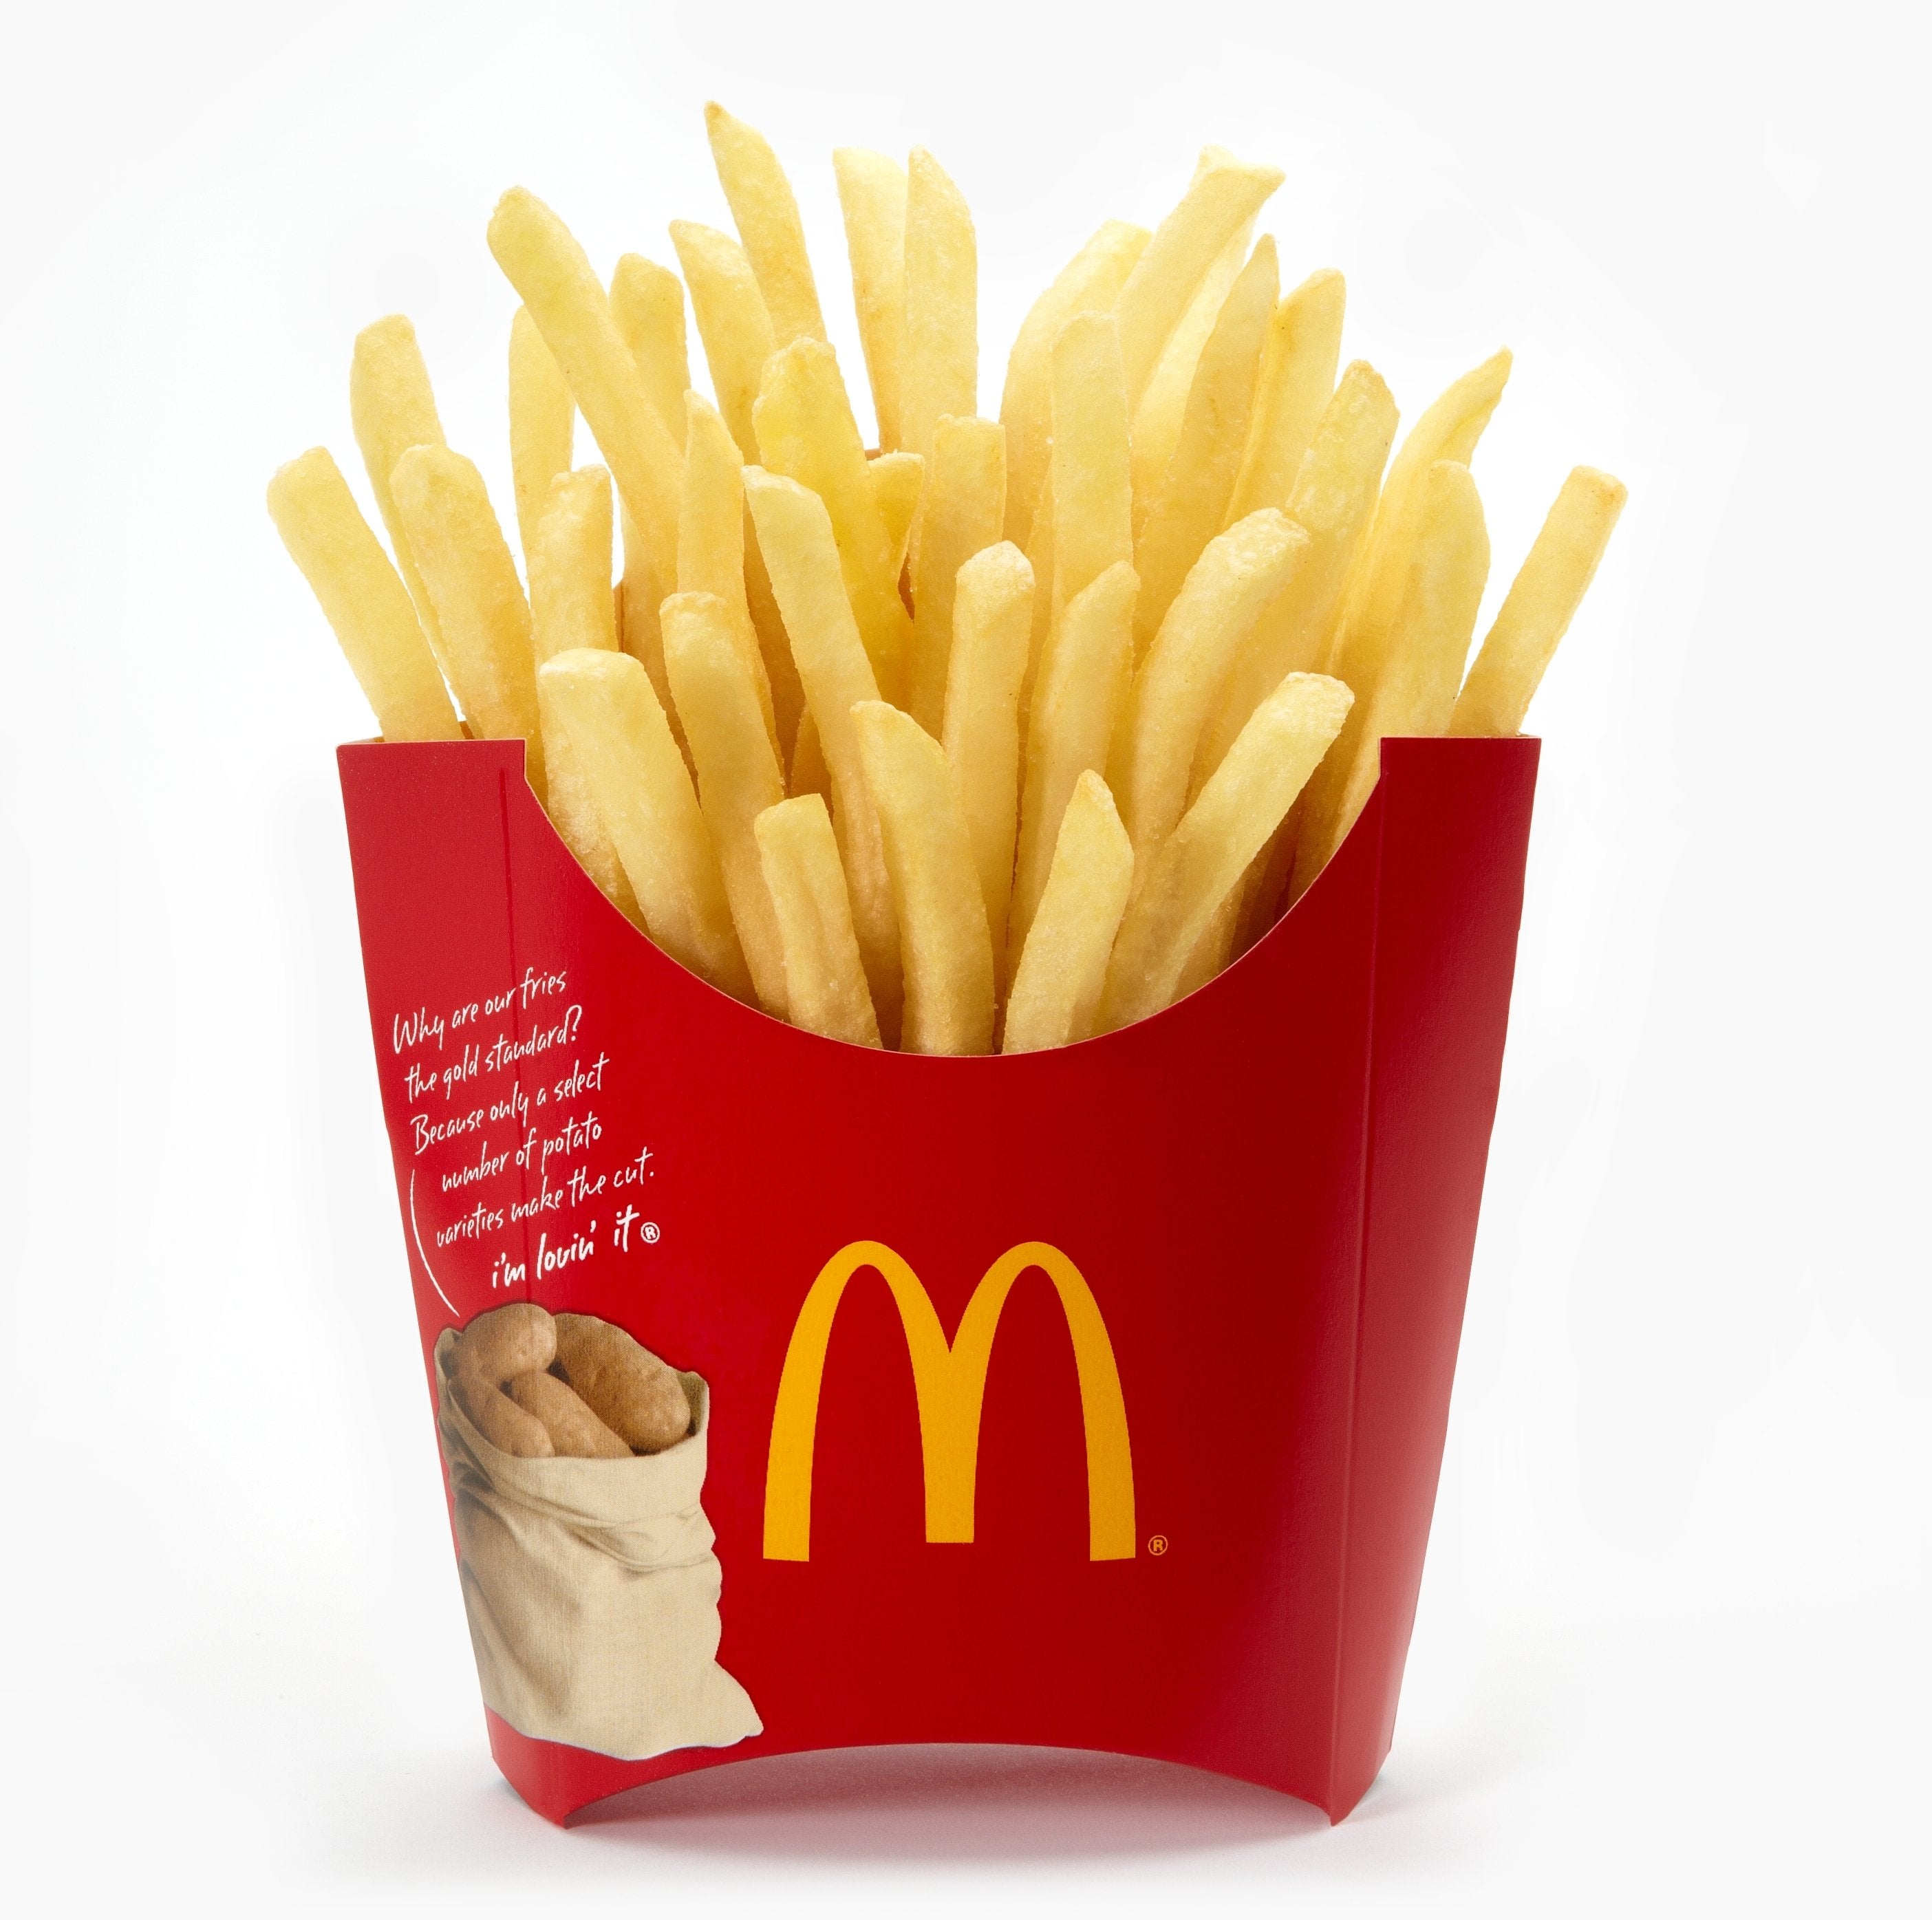 Score free McDonald&#039;s fries when you use Apple Pay - Here&#039;s how you can score free McDonald&#039;s fries just for using Apple Pay